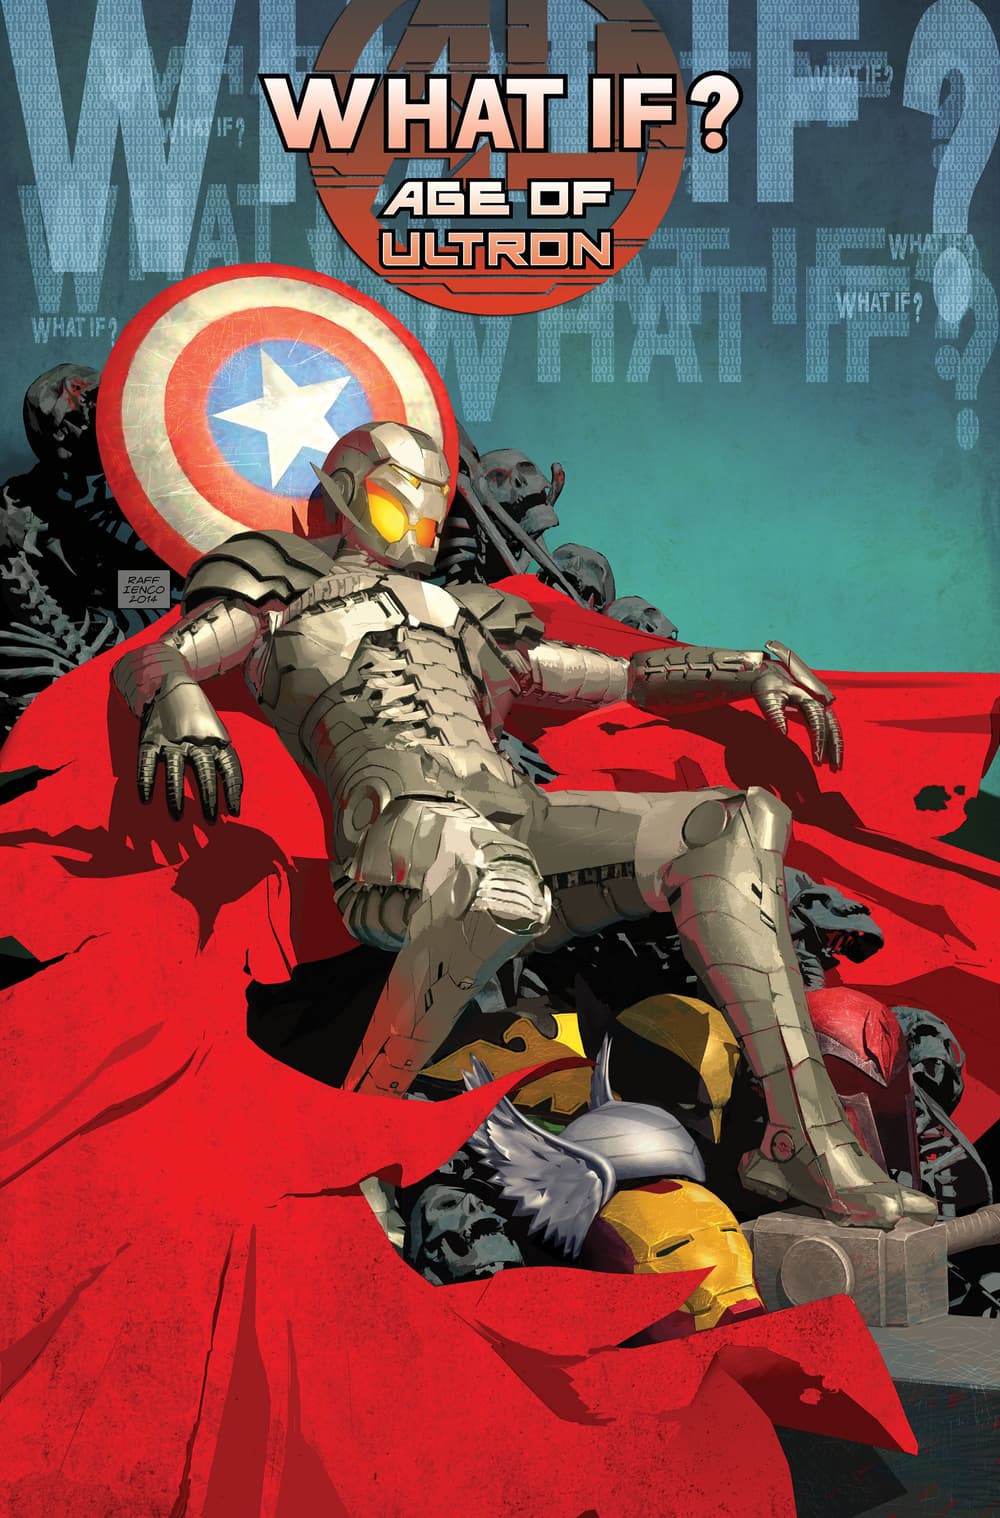 Cover to WHAT IF? AGE OF ULTRON.